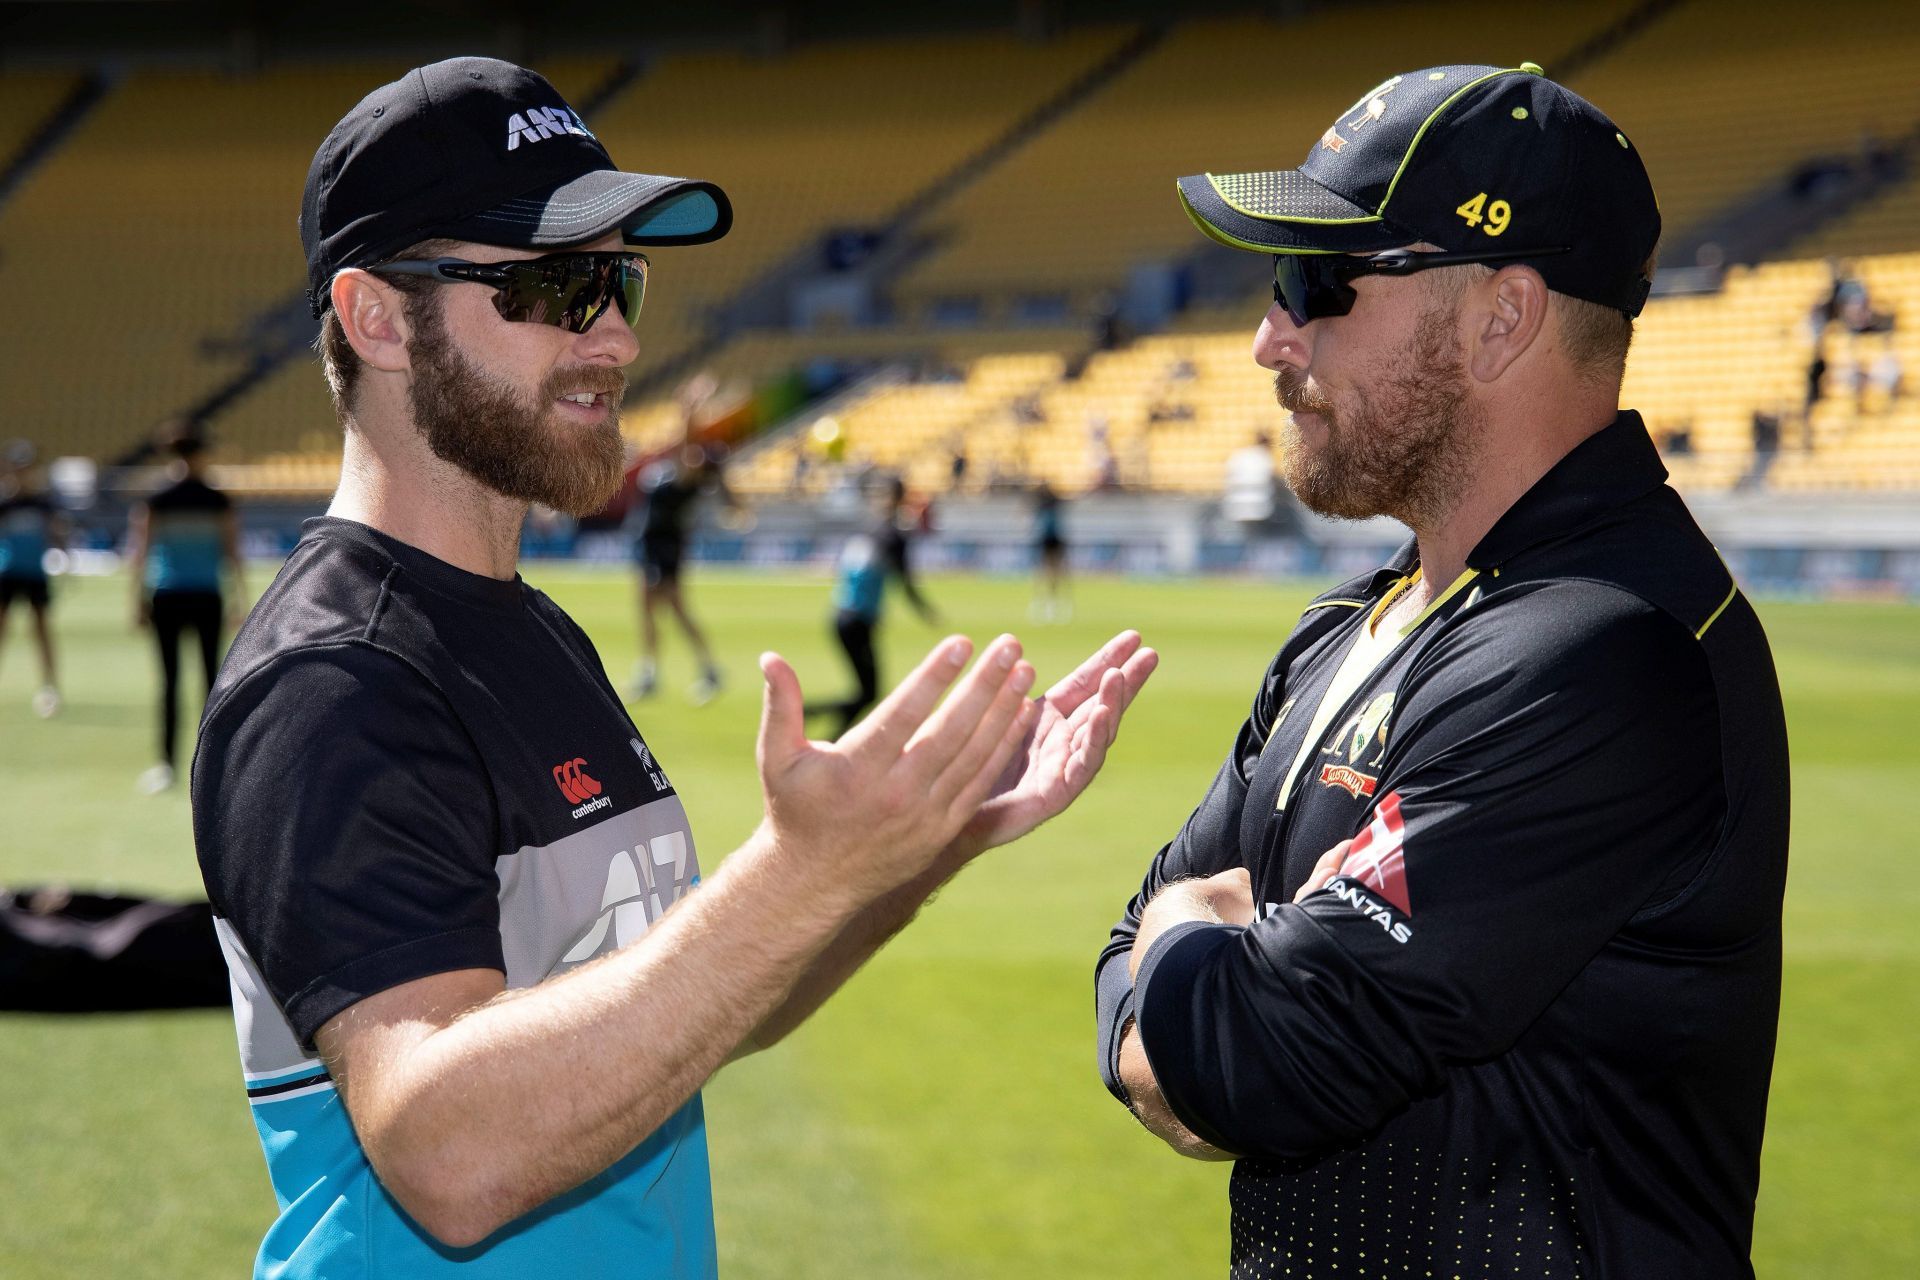 Kane Williamson and Aaron Finch. (Credits: Getty)